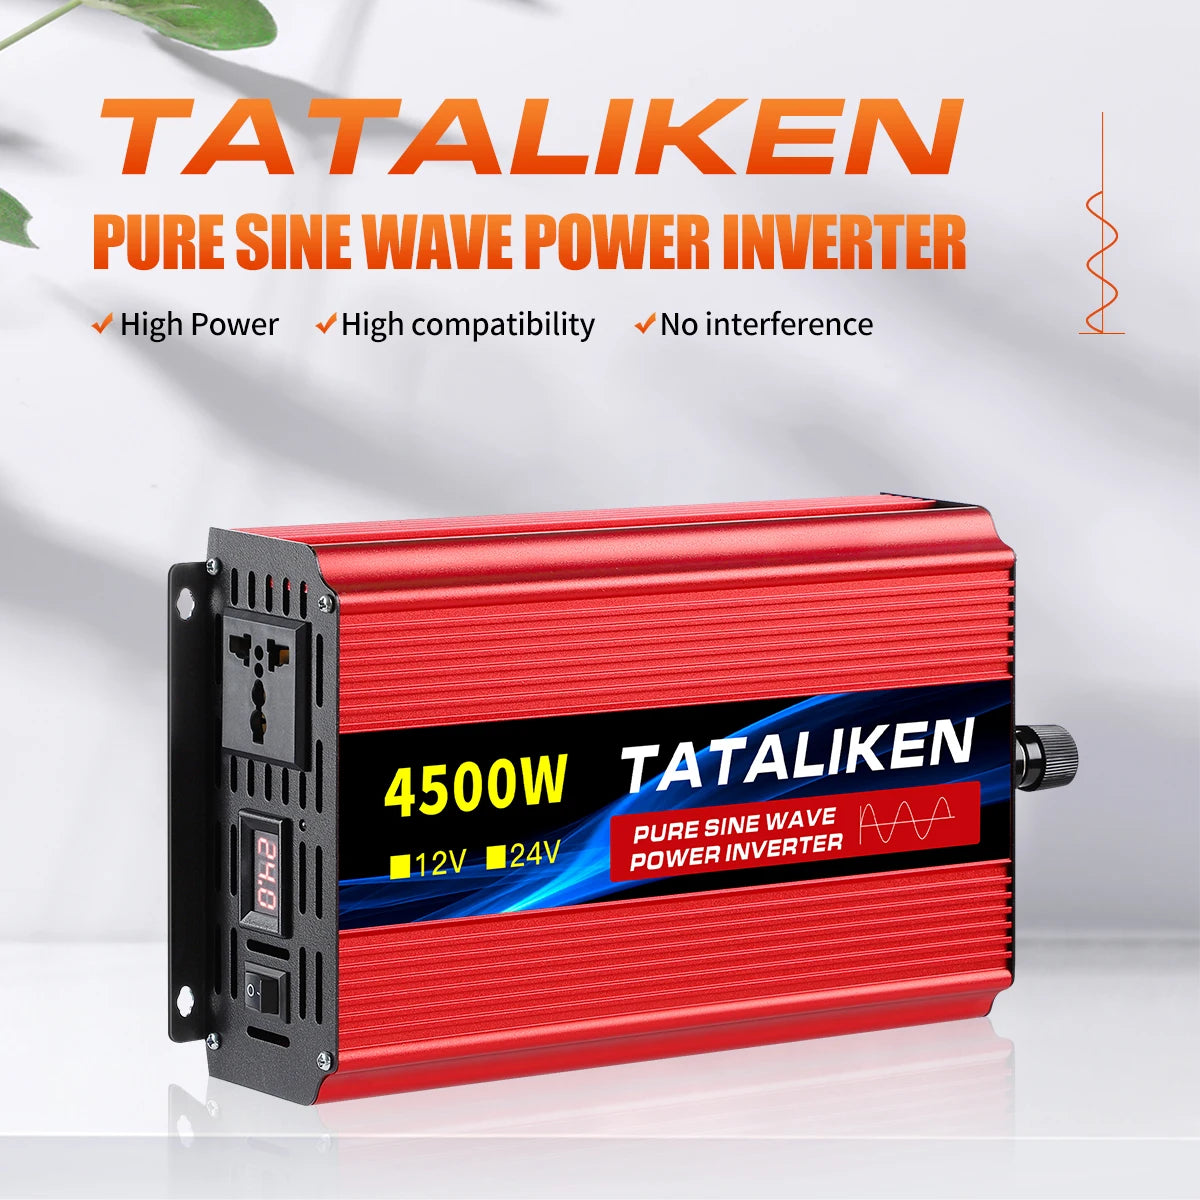 High-power inverter for DC-AC conversion with LED display, compatible with 12V/24V systems and capable of 7,000W/8,000W output.